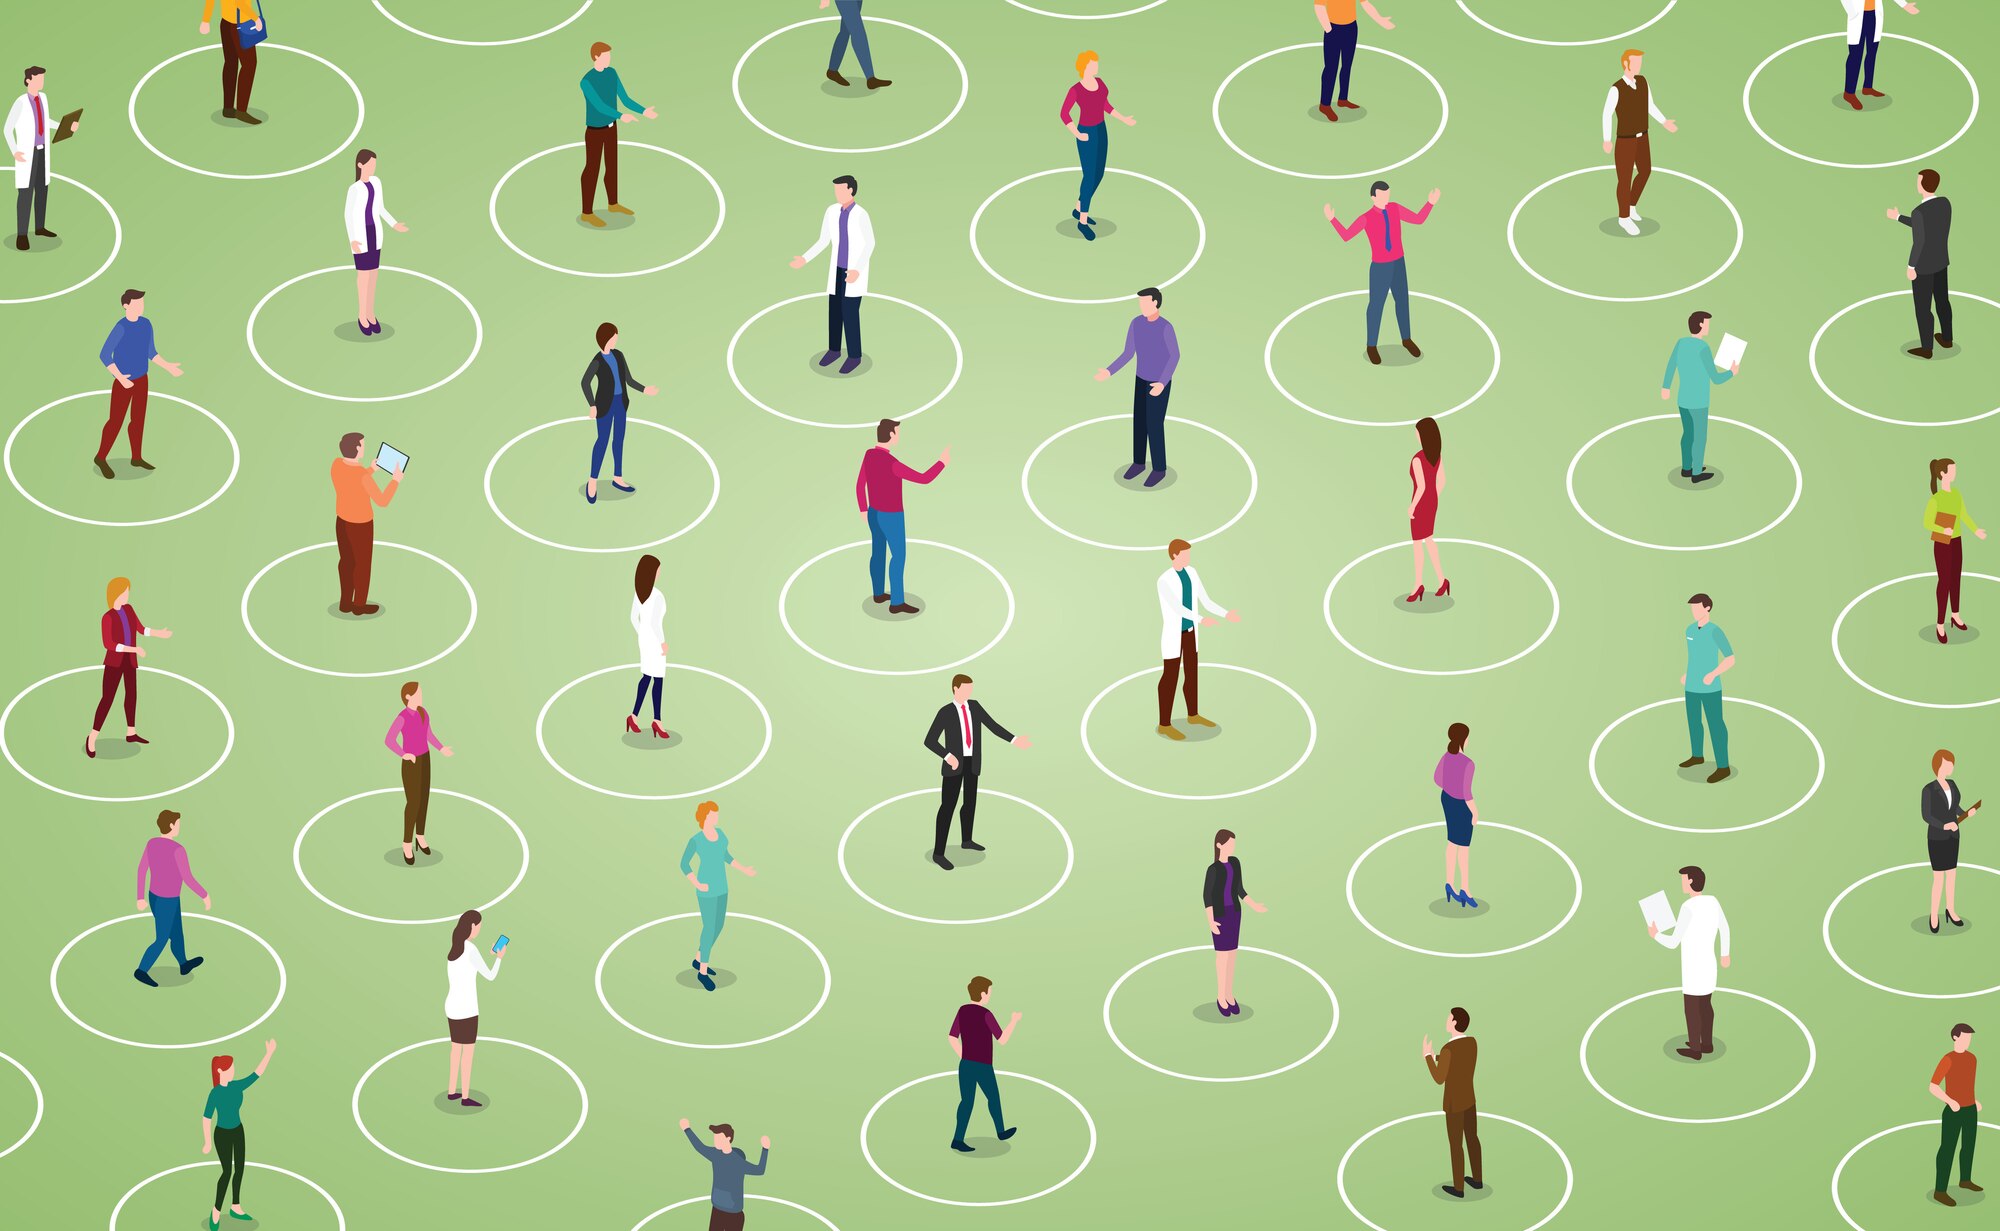 Graphic shows people standing in their individual circles apart from each other.